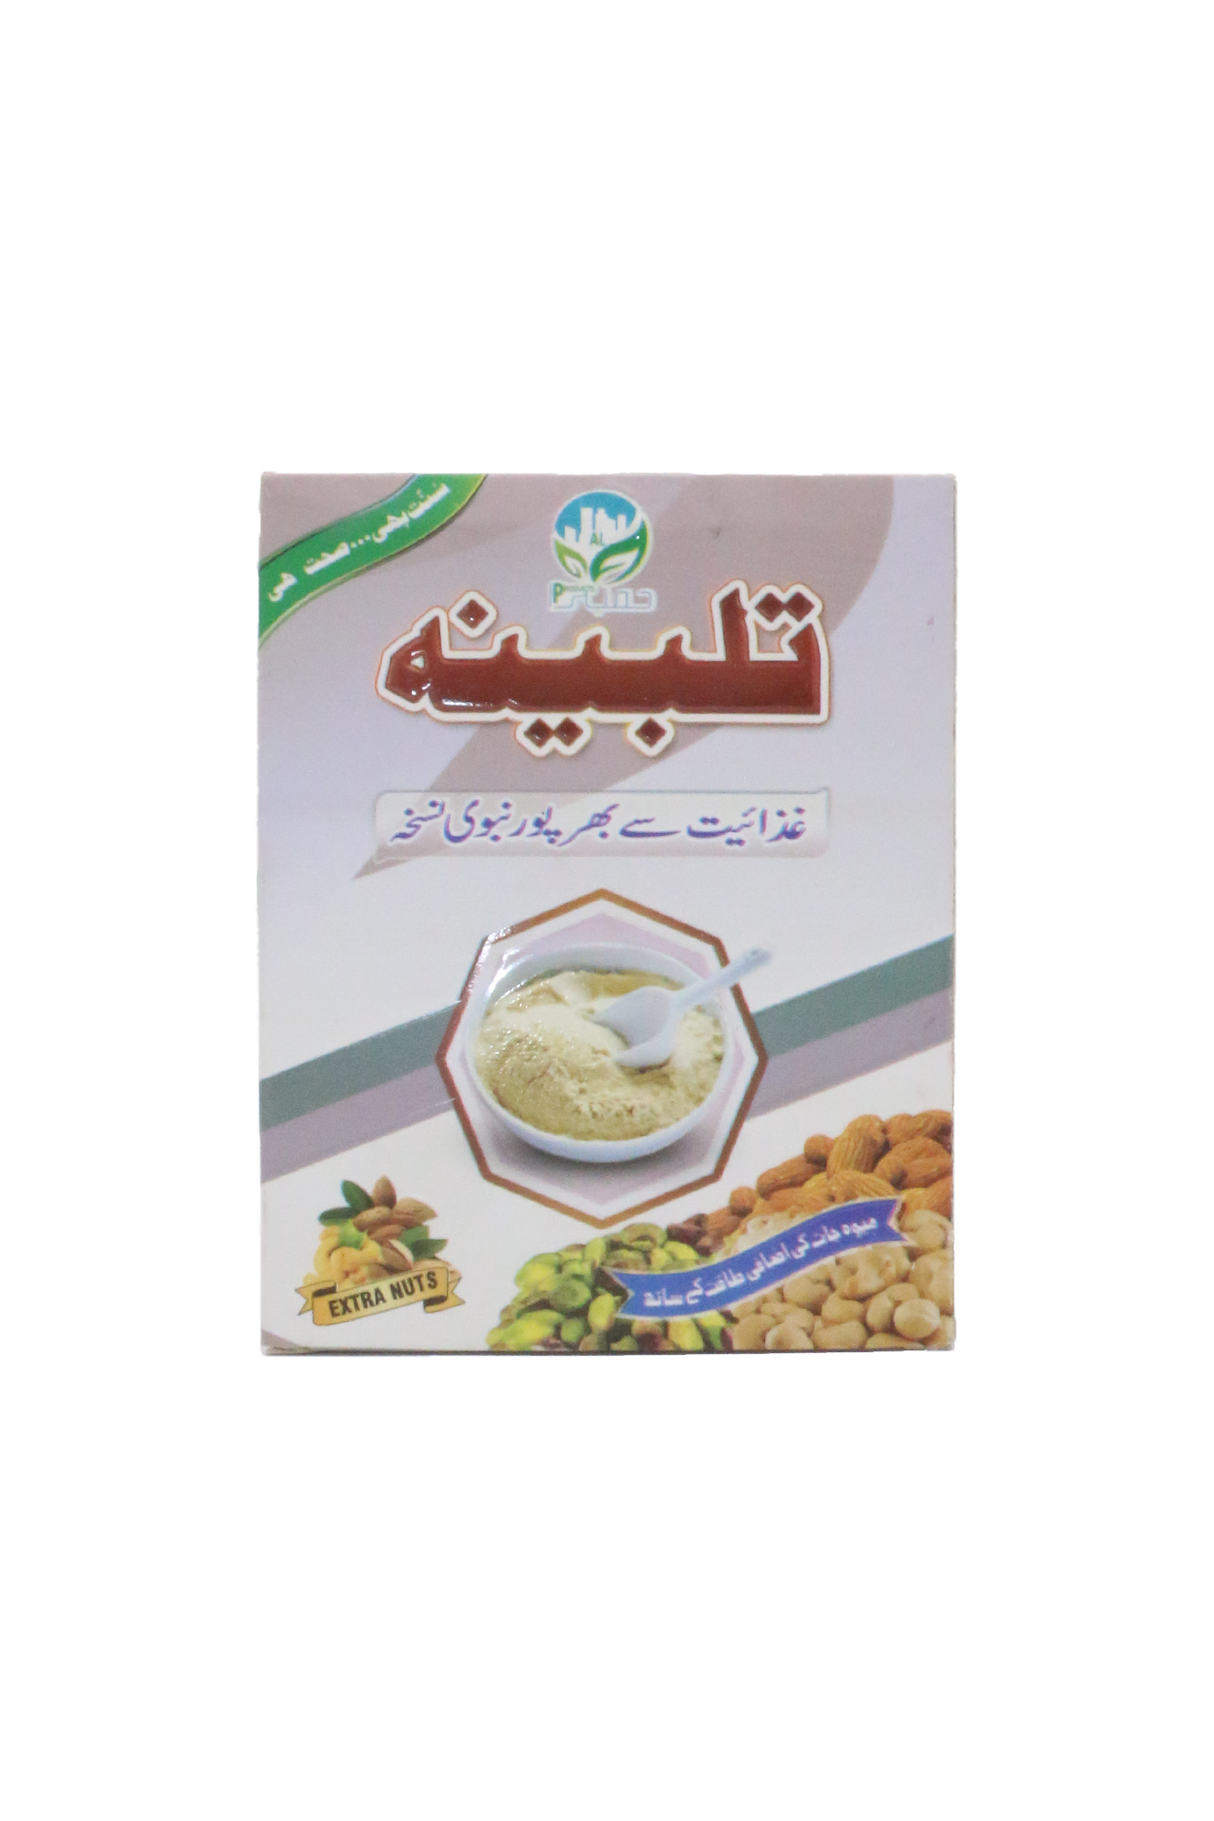 talbina cereal extra nuts flavour 200g